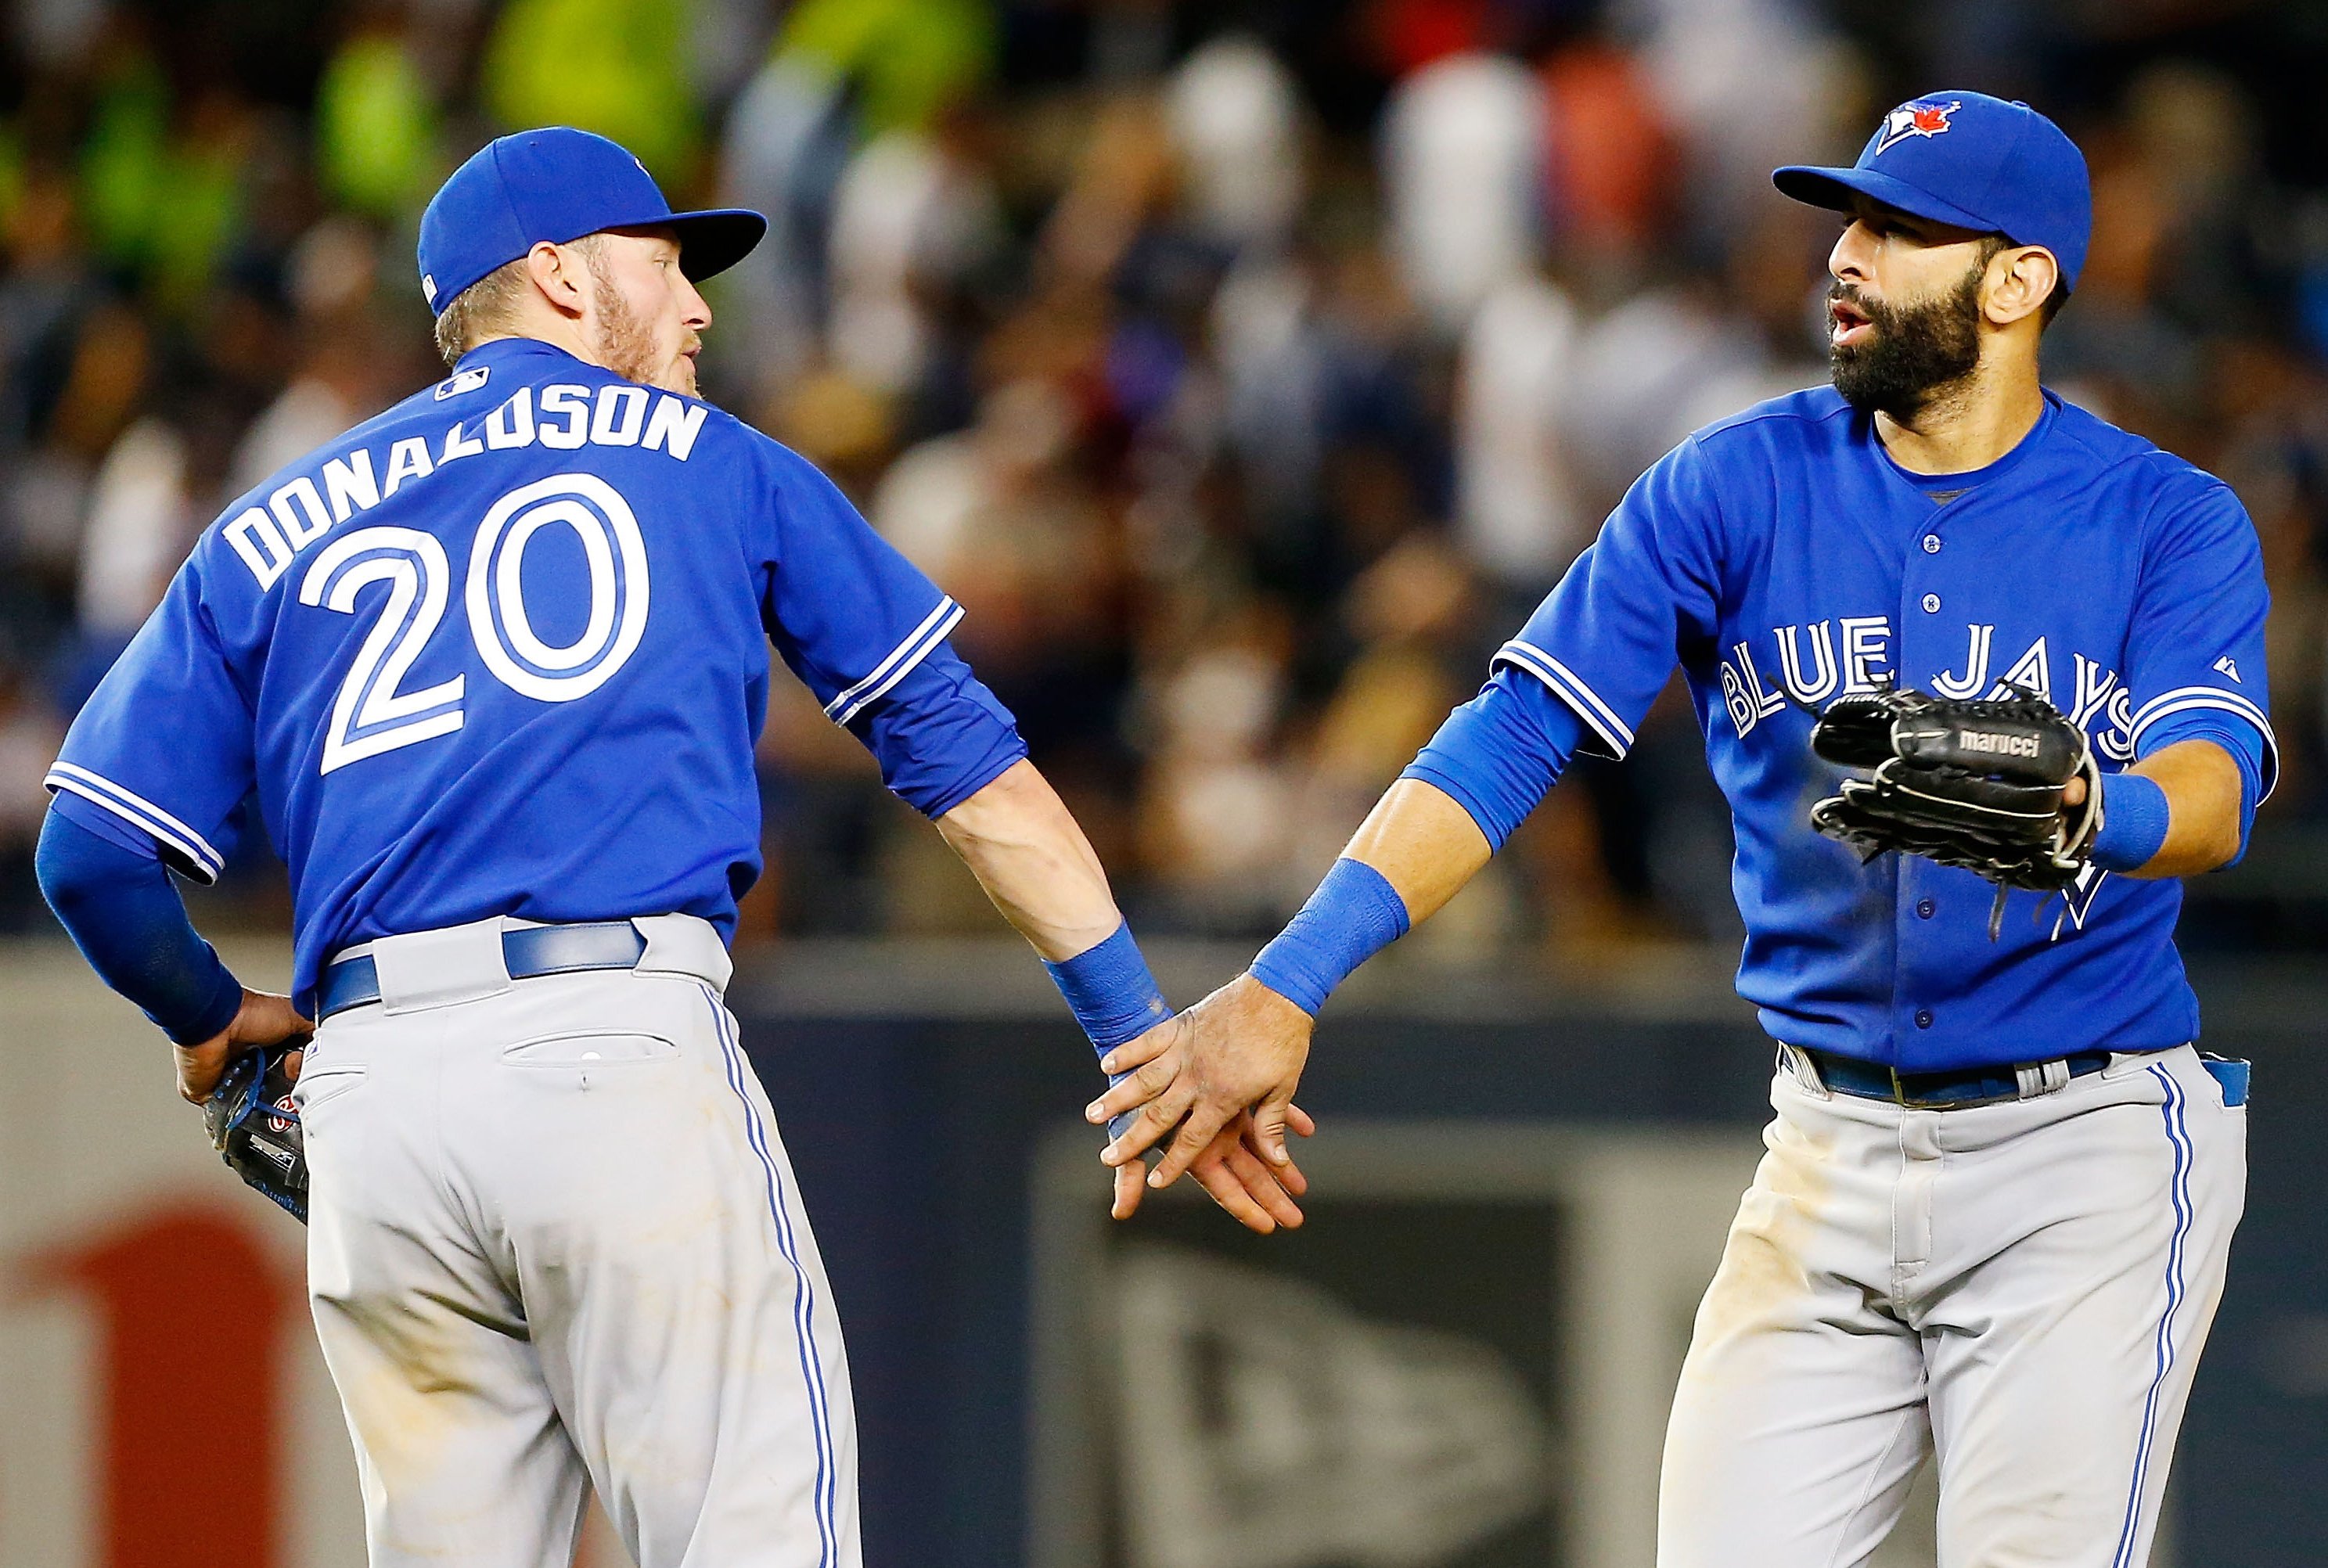 Mark Buehrle grabs MLB-best 10th win as Blue Jays down Royals